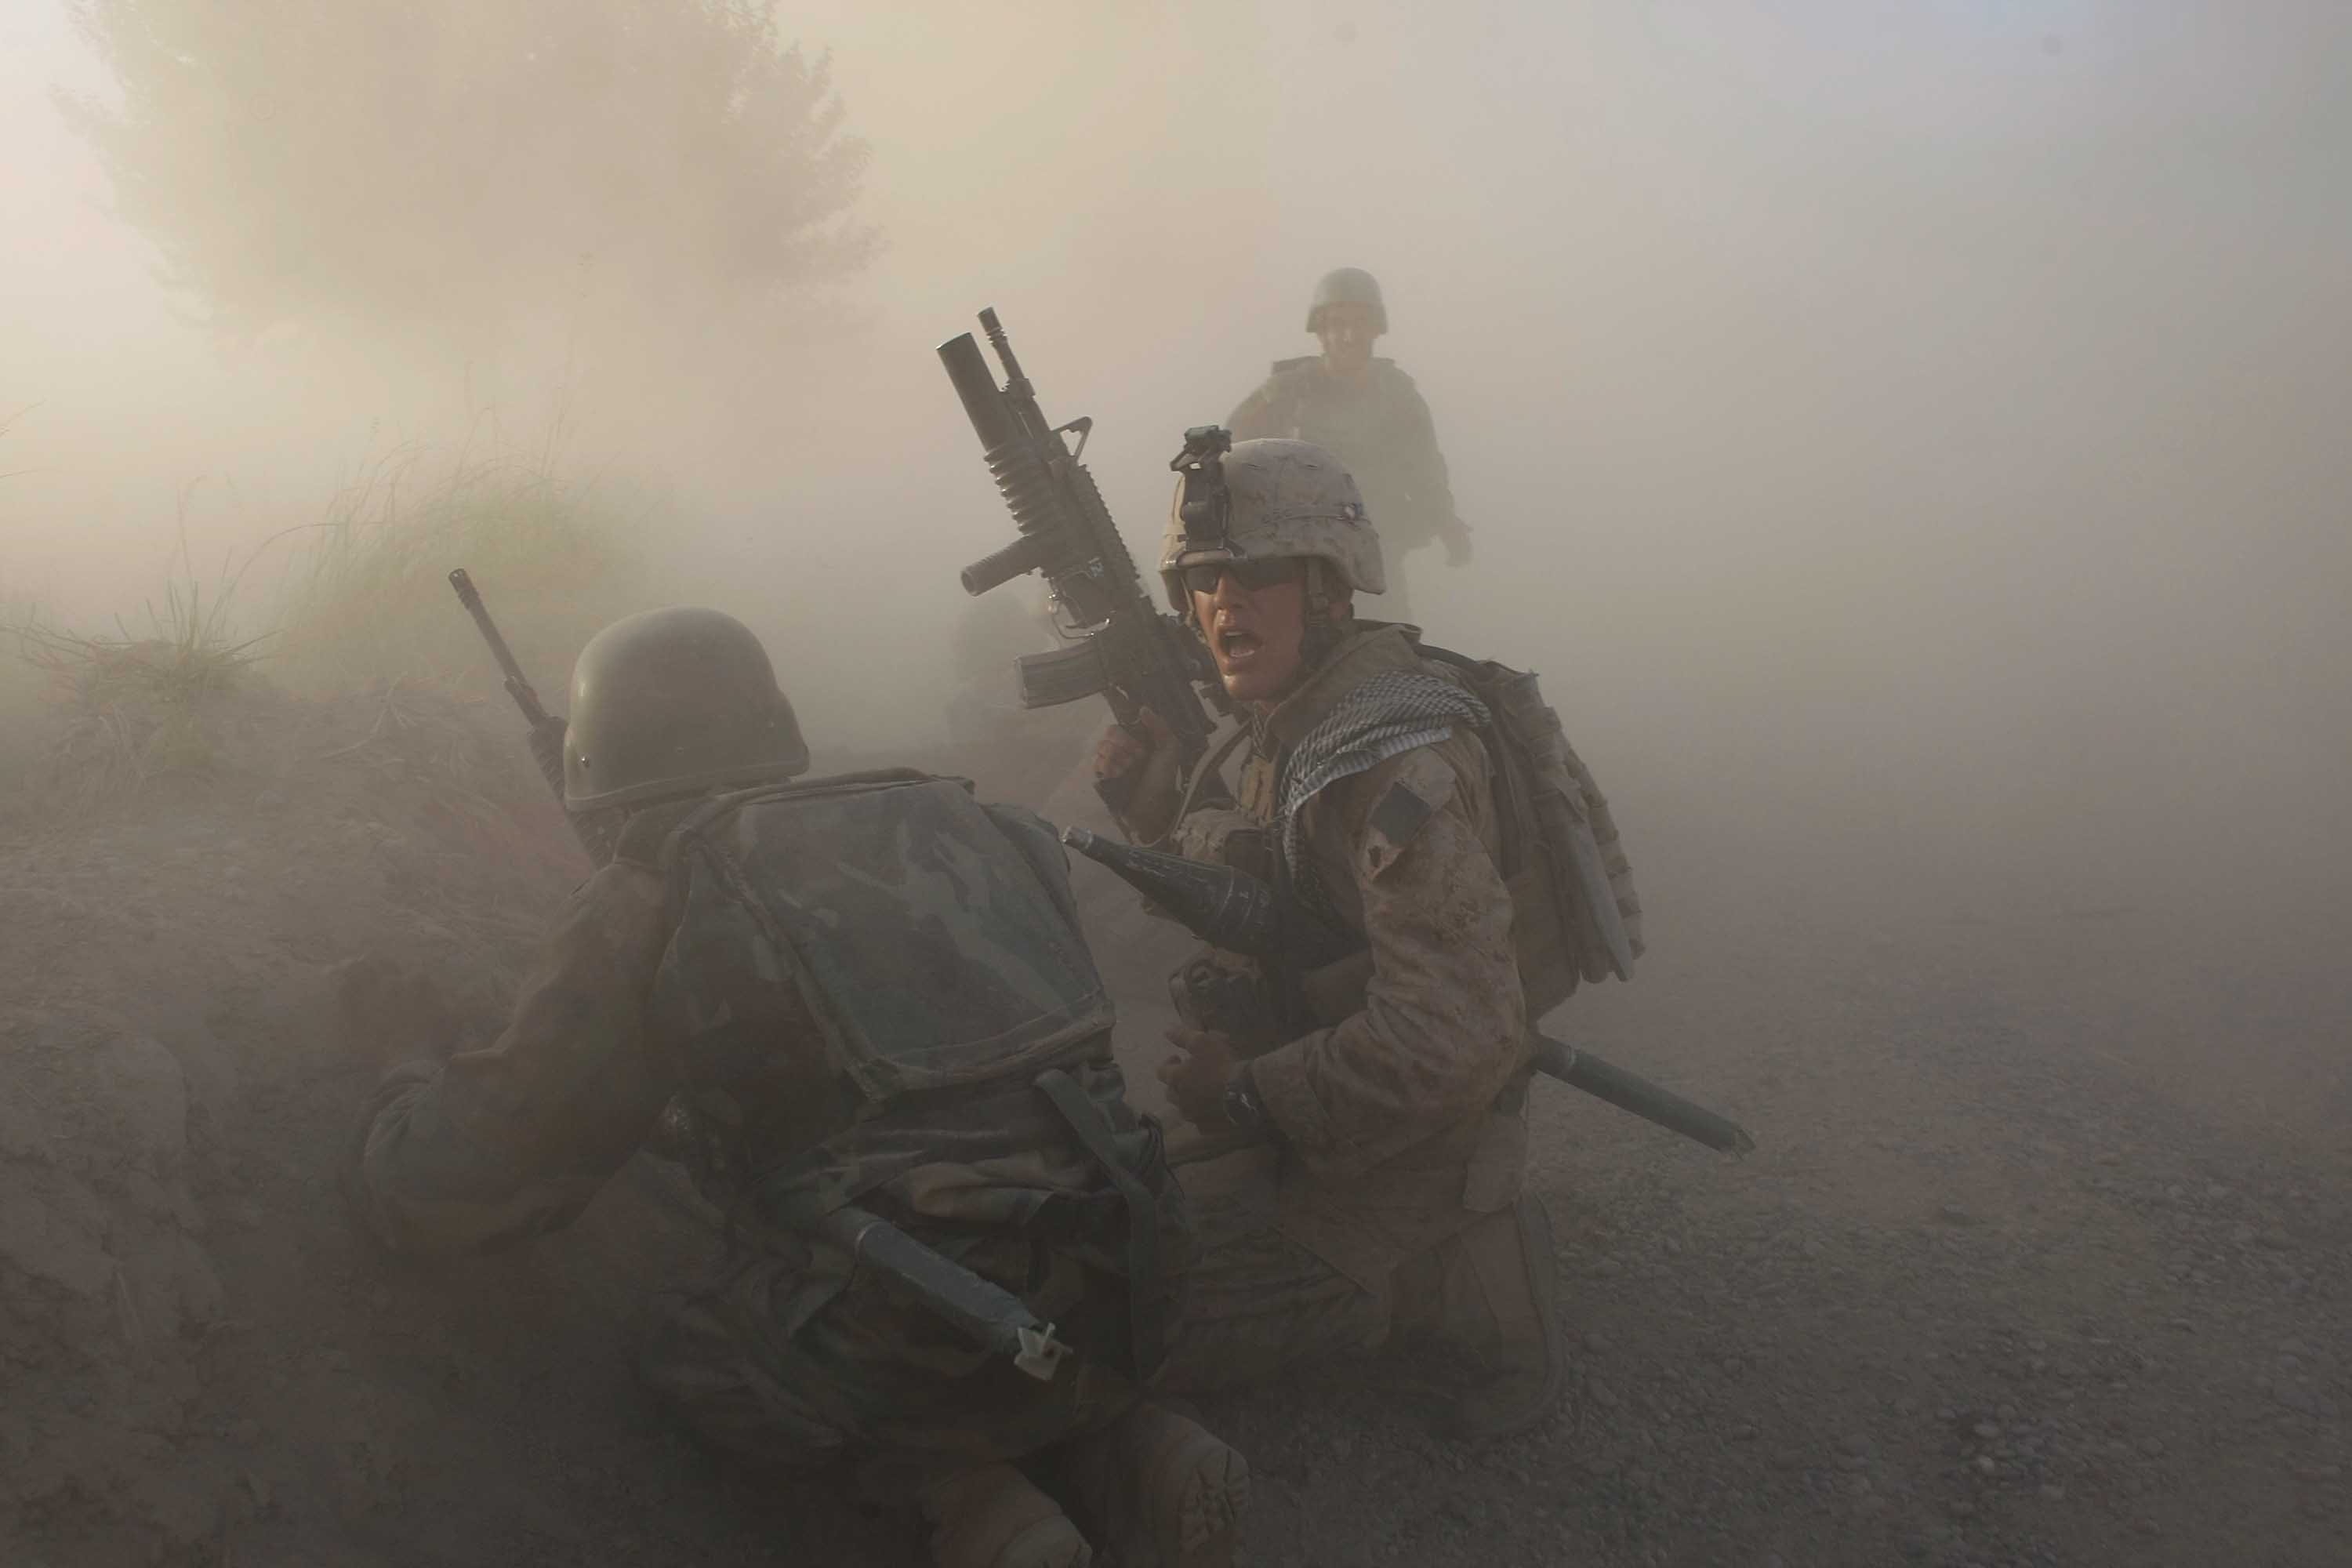 MIAN POSHTEH, AFGHANISTAN- JULY 17: A U.S. Marine with the 2nd Marine Expeditionary Brigade, RCT 2nd Battalion 8th Marines Echo Co. along with an Afghan soldier react as dust blankets the area after an IED exploded while they were under enemy fire on July 17, 2009 in Mian Poshteh, Afghanistan. The Marines are part of Operation Khanjari which was launched to take areas in the Southern Helmand Province that Taliban fighters are using as a resupply route and to help the local Afghan population prepare for the upcoming presidential elections. (Photo by Joe Raedle/Getty Images)